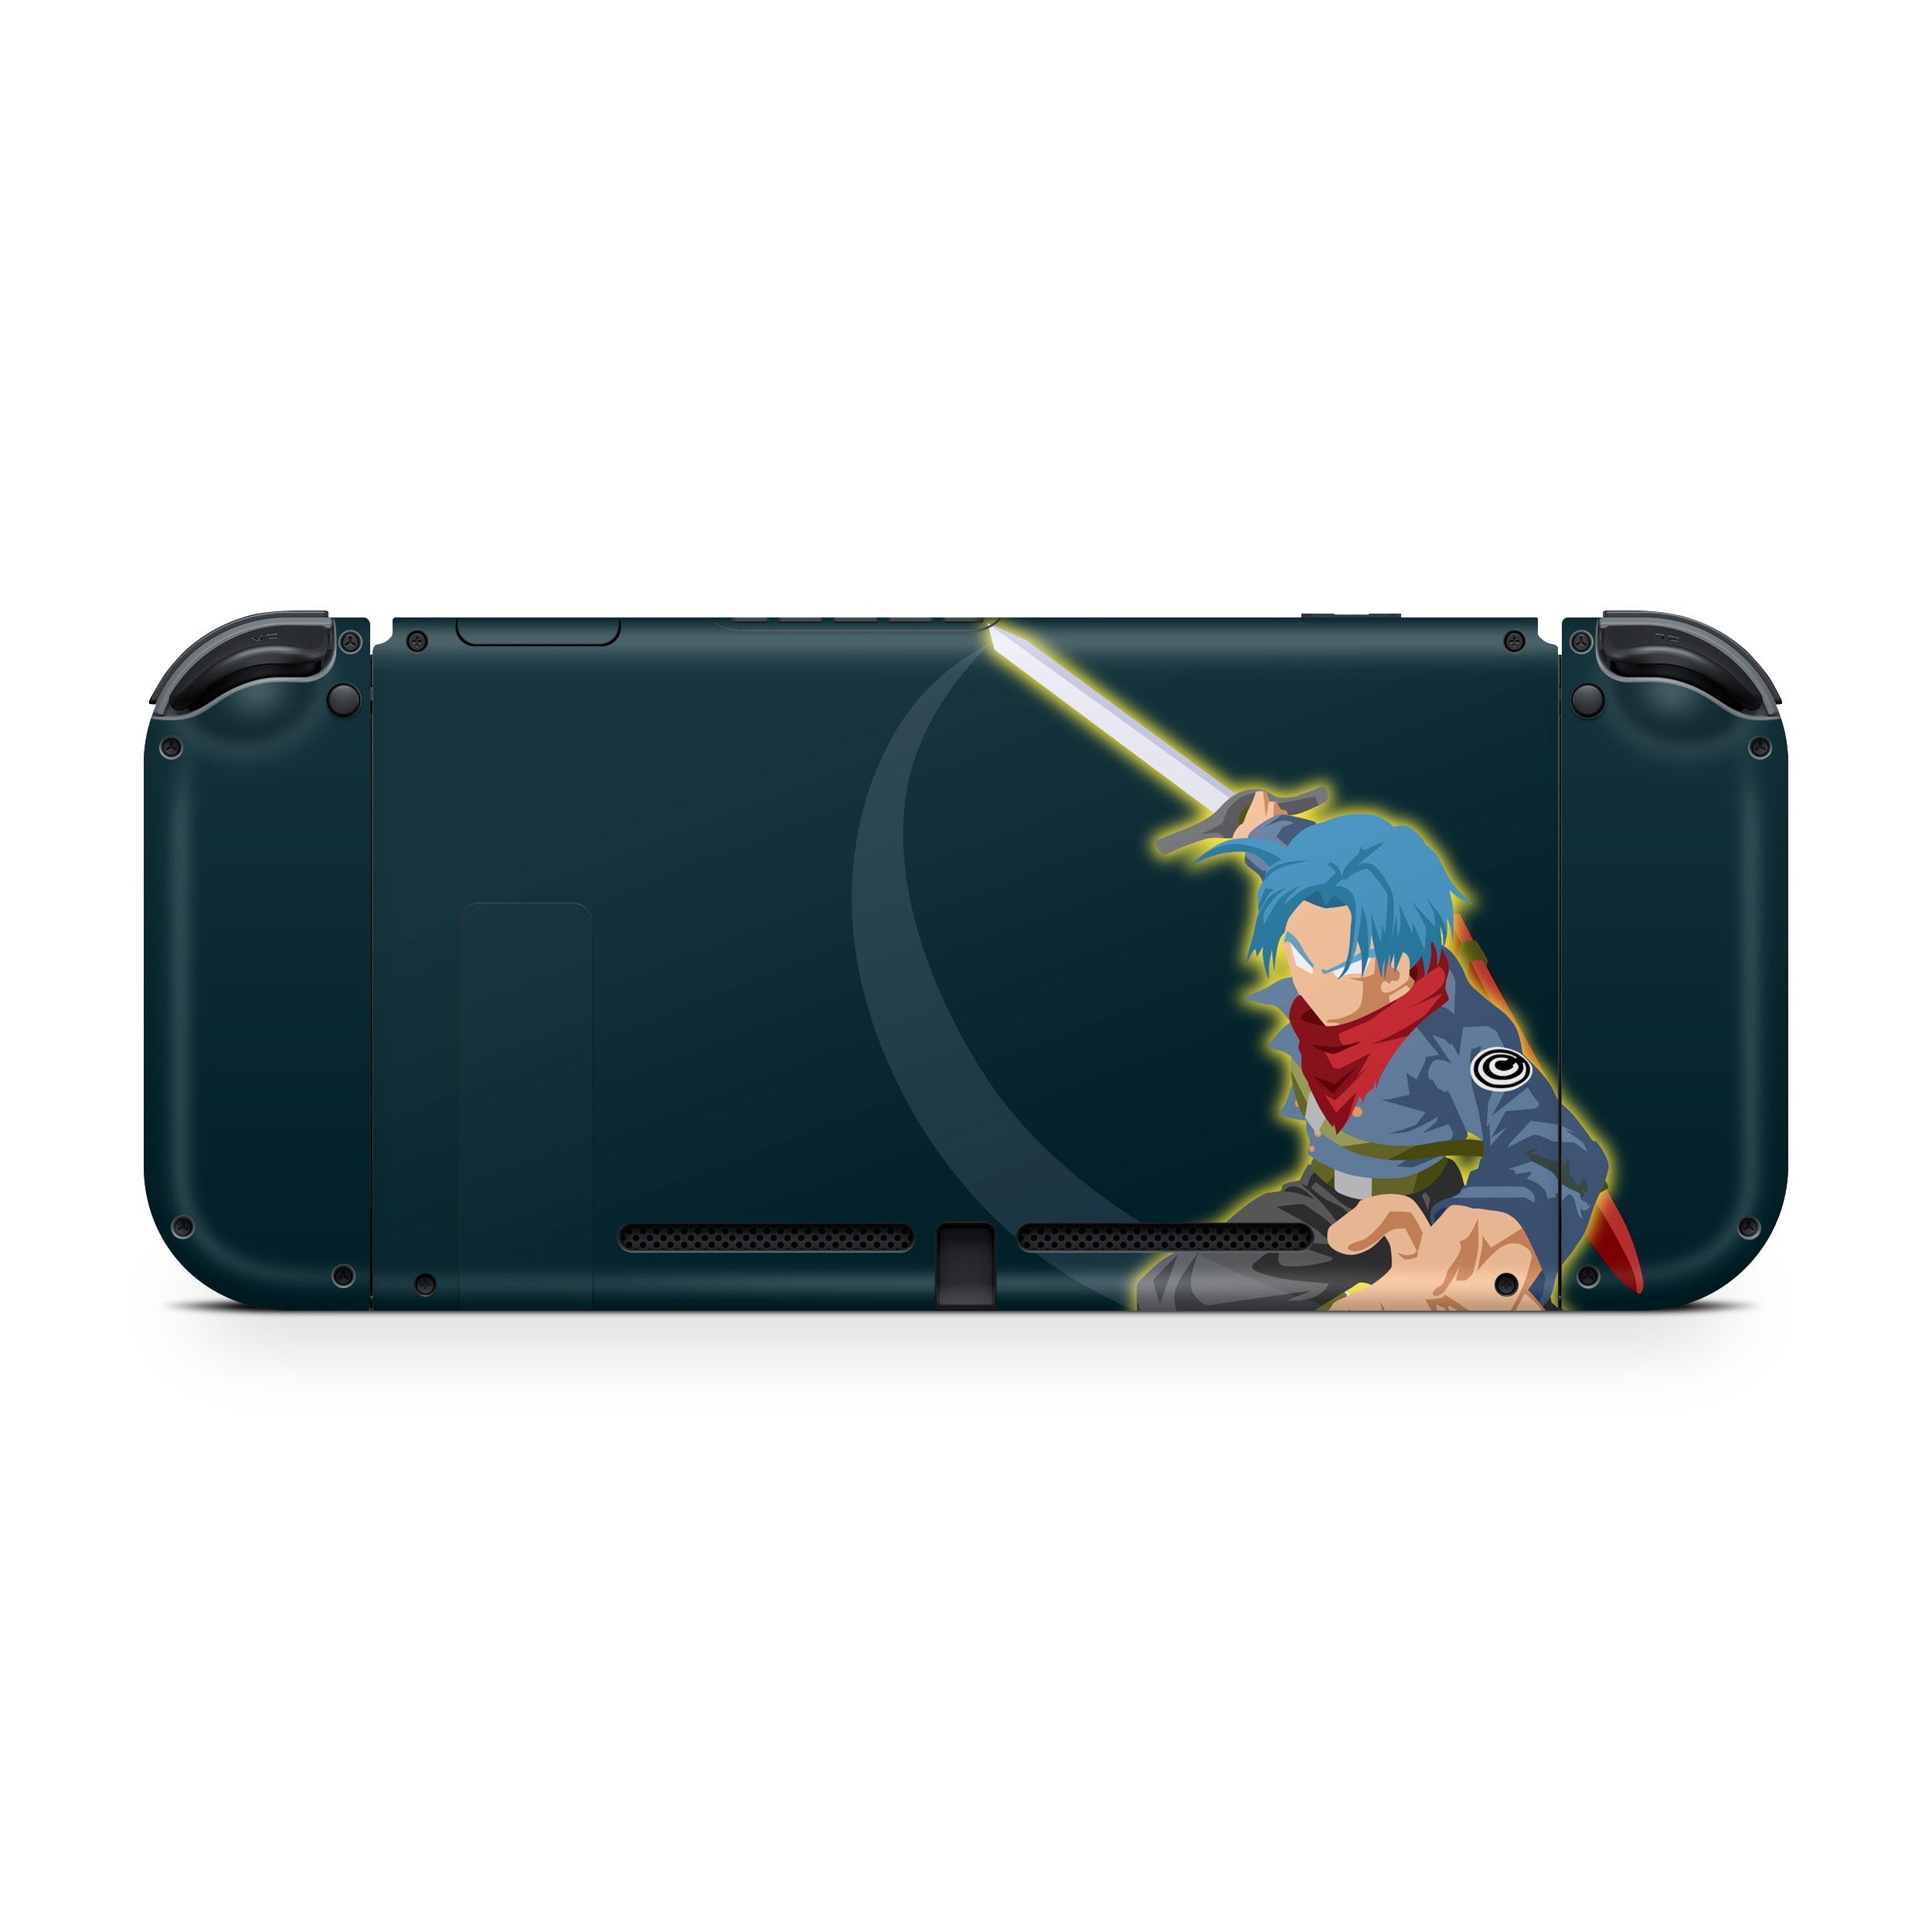 A video game skin featuring a Dragon Ball Super Trunks design for the Nintendo Switch.